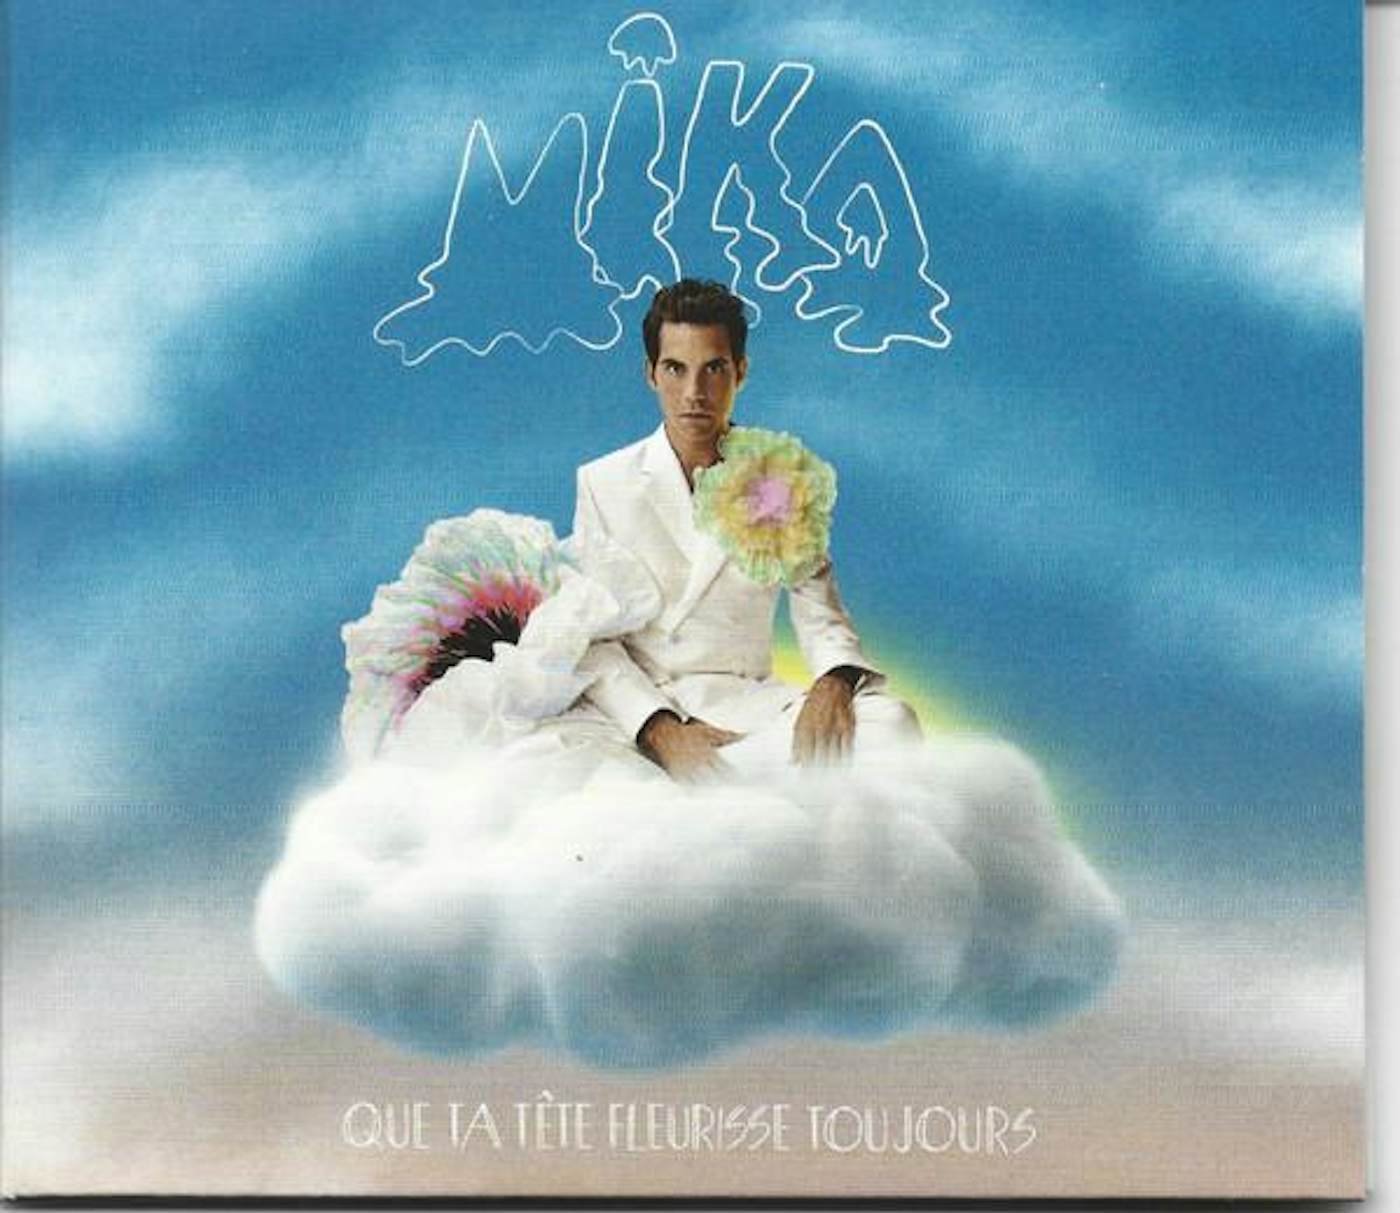 mika / cd / life in cartoon motion - Buy CD's of Pop Music on